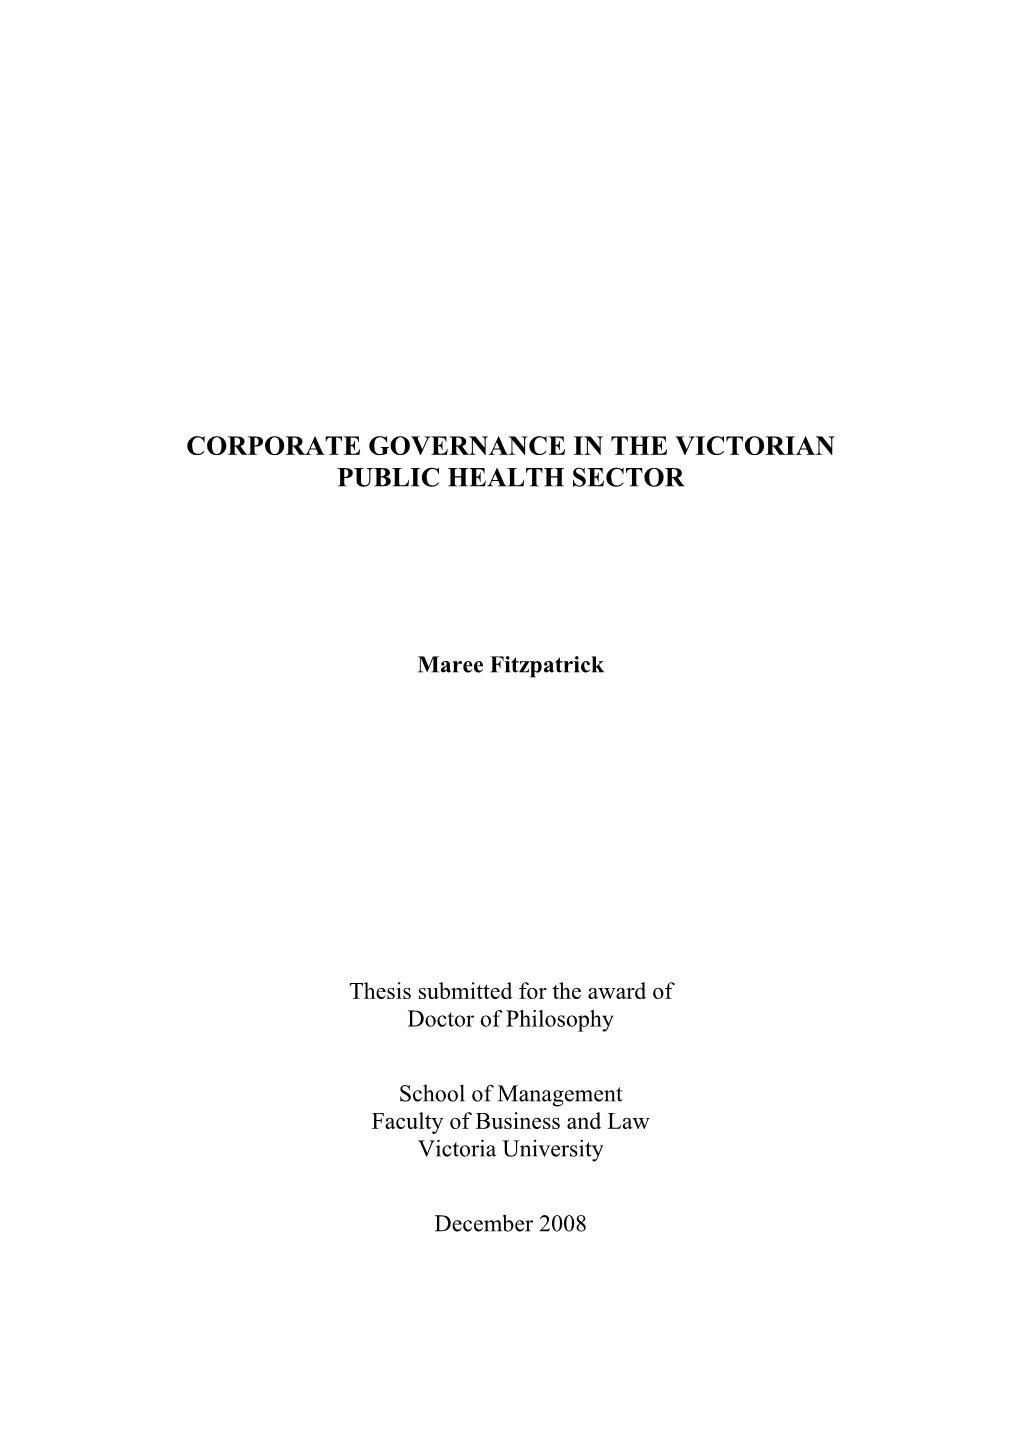 Corporate Governance in the Victorian Public Health Sector